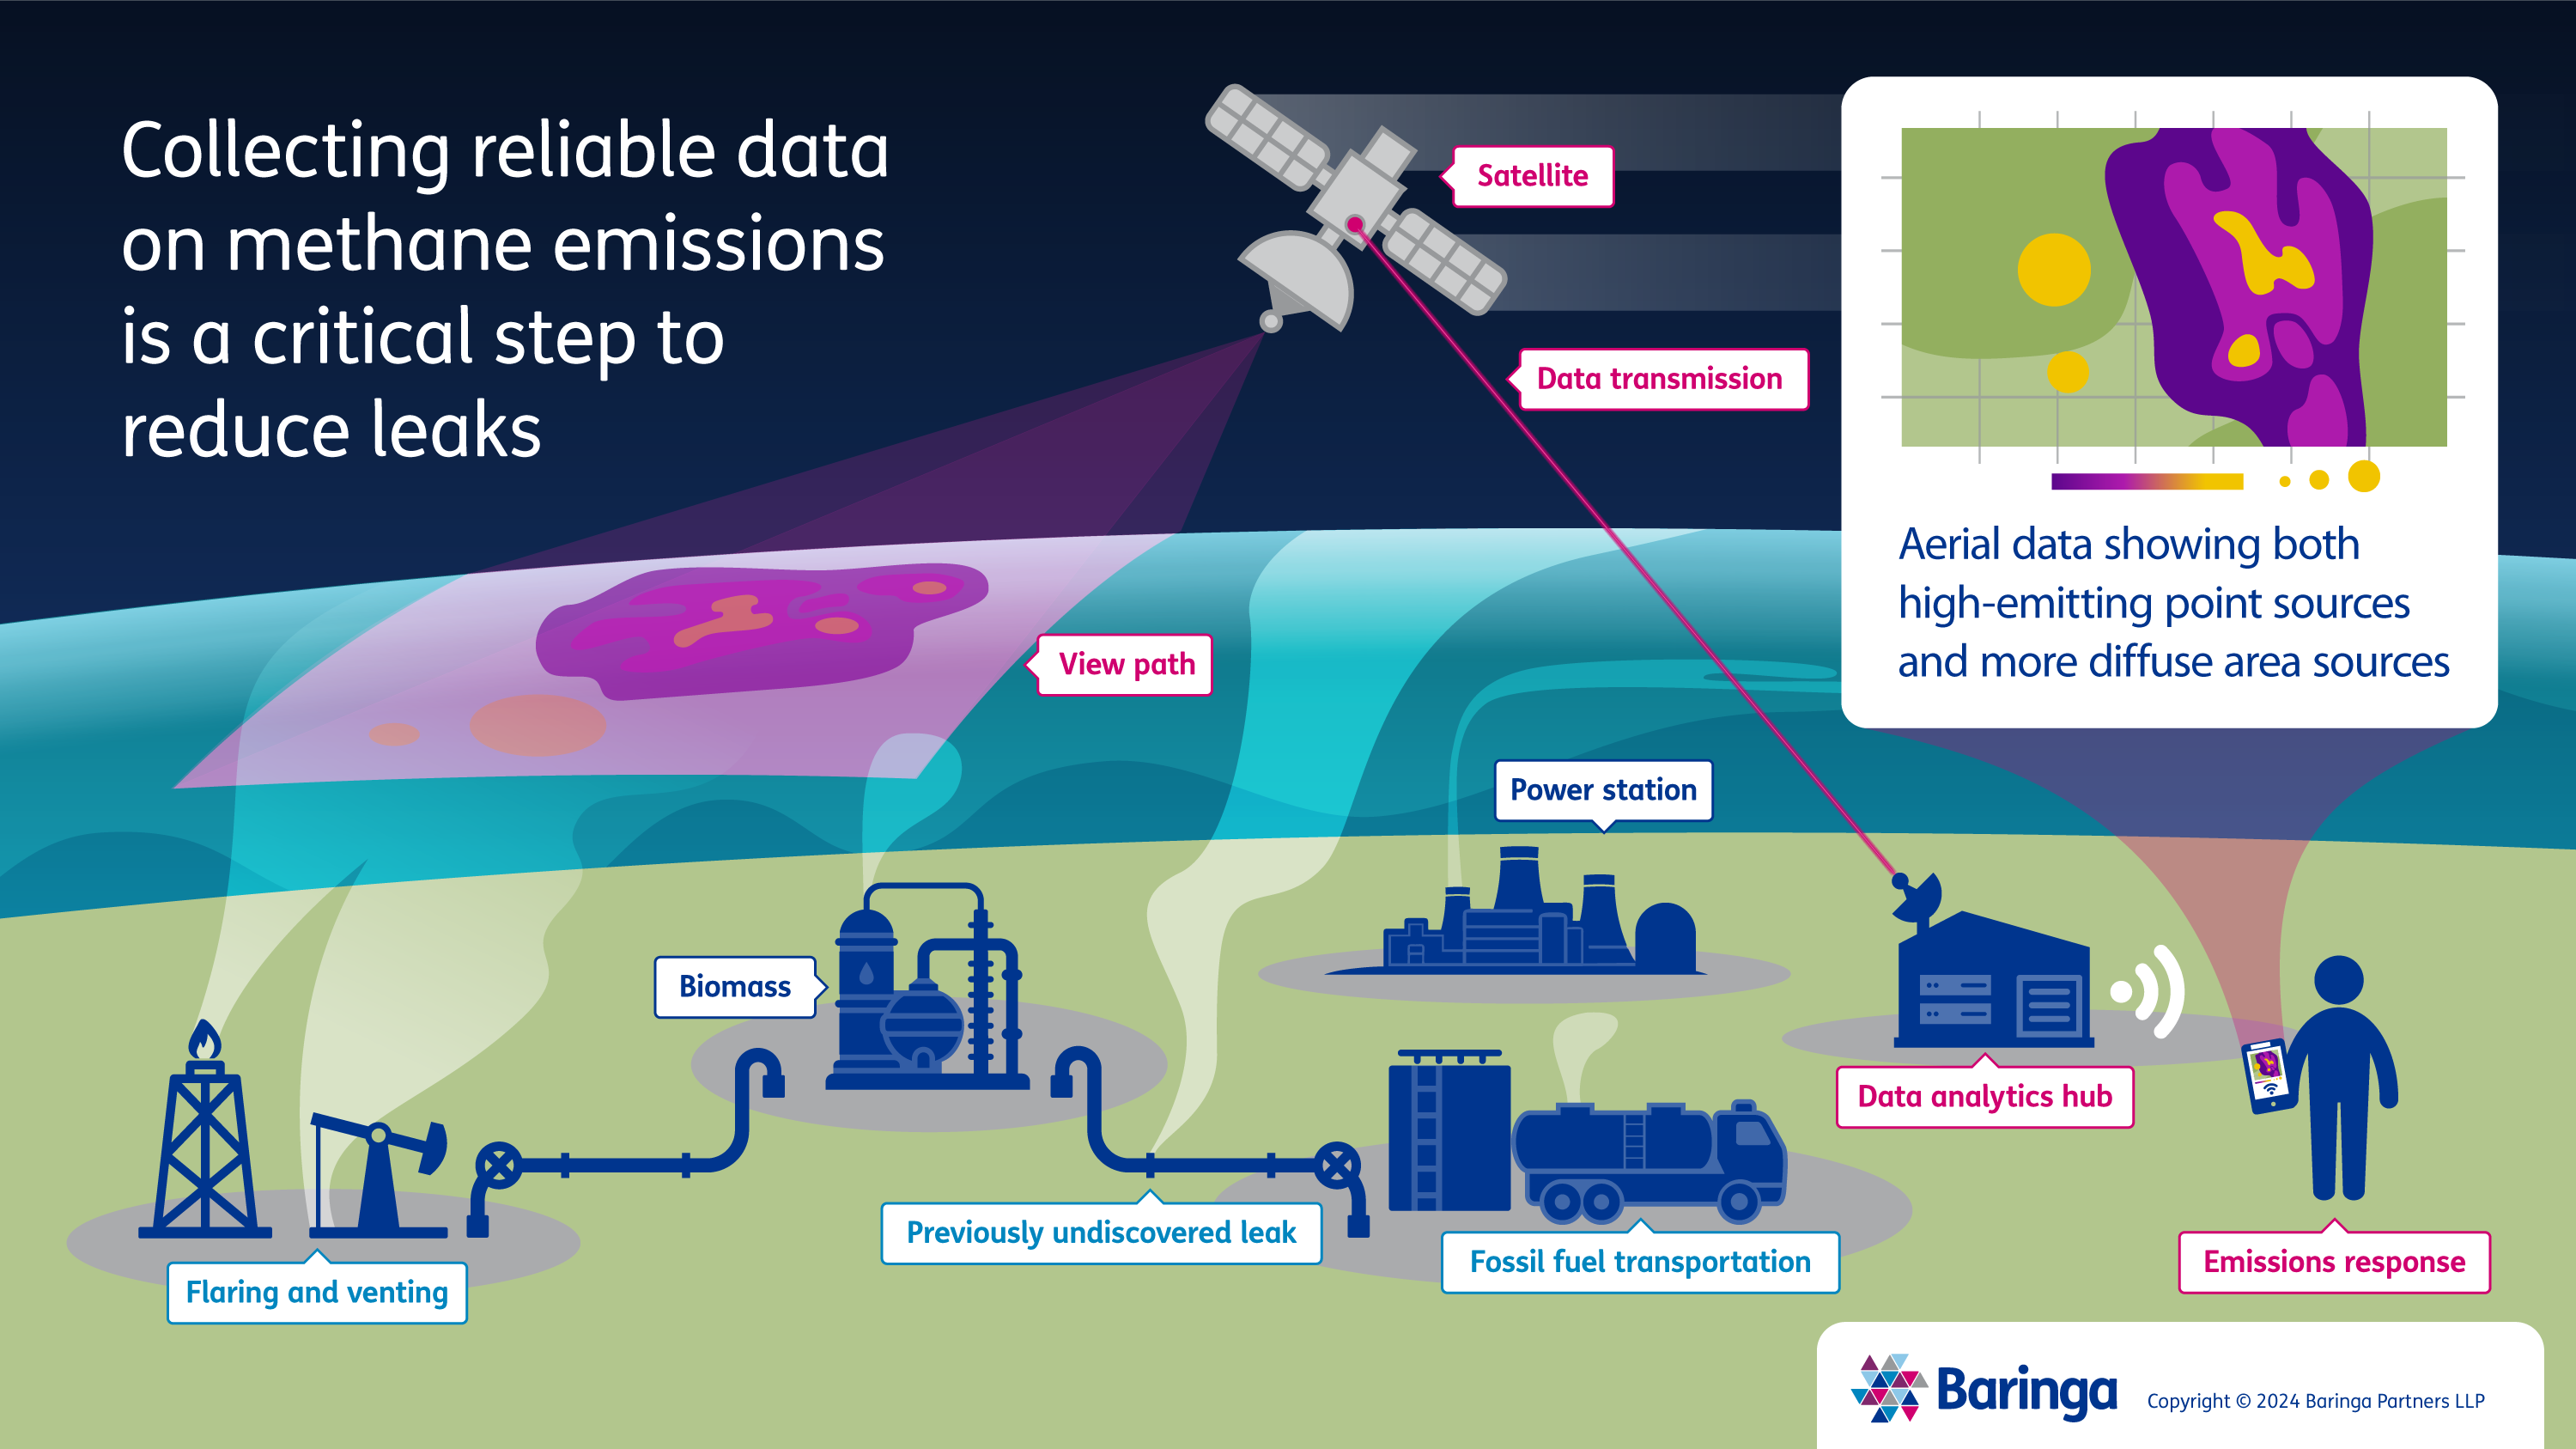 Collecting reliable data on methane emissions to reduce leaks